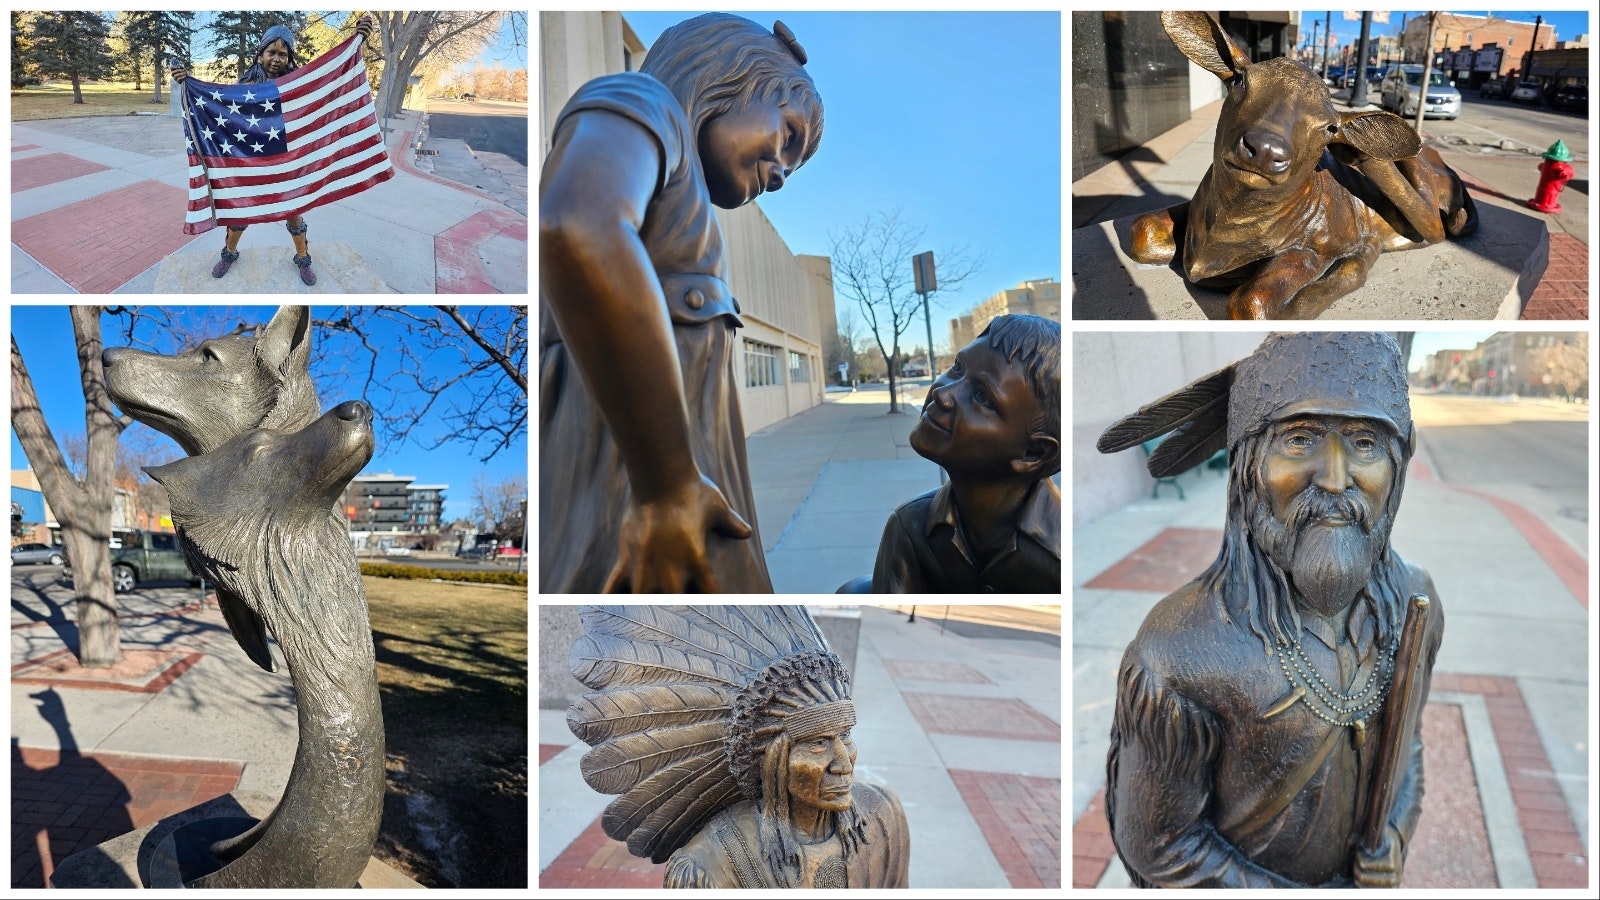 Clockwise from top left: The Native Girl by George Linden, donated by Alice's Lakeside Legacy; Devoted by Chuck Weavers; Chief Yellowcalf by Tanner Loren, donated by ANB bank; Mountain Man John Colter, sculpted by Tanner Loren and donated by Bob Born; Norma's Calf by Rich Haines for the Deselms family; Family Ties by Chris Navarro, donated by Dixie and Tom Roberts.